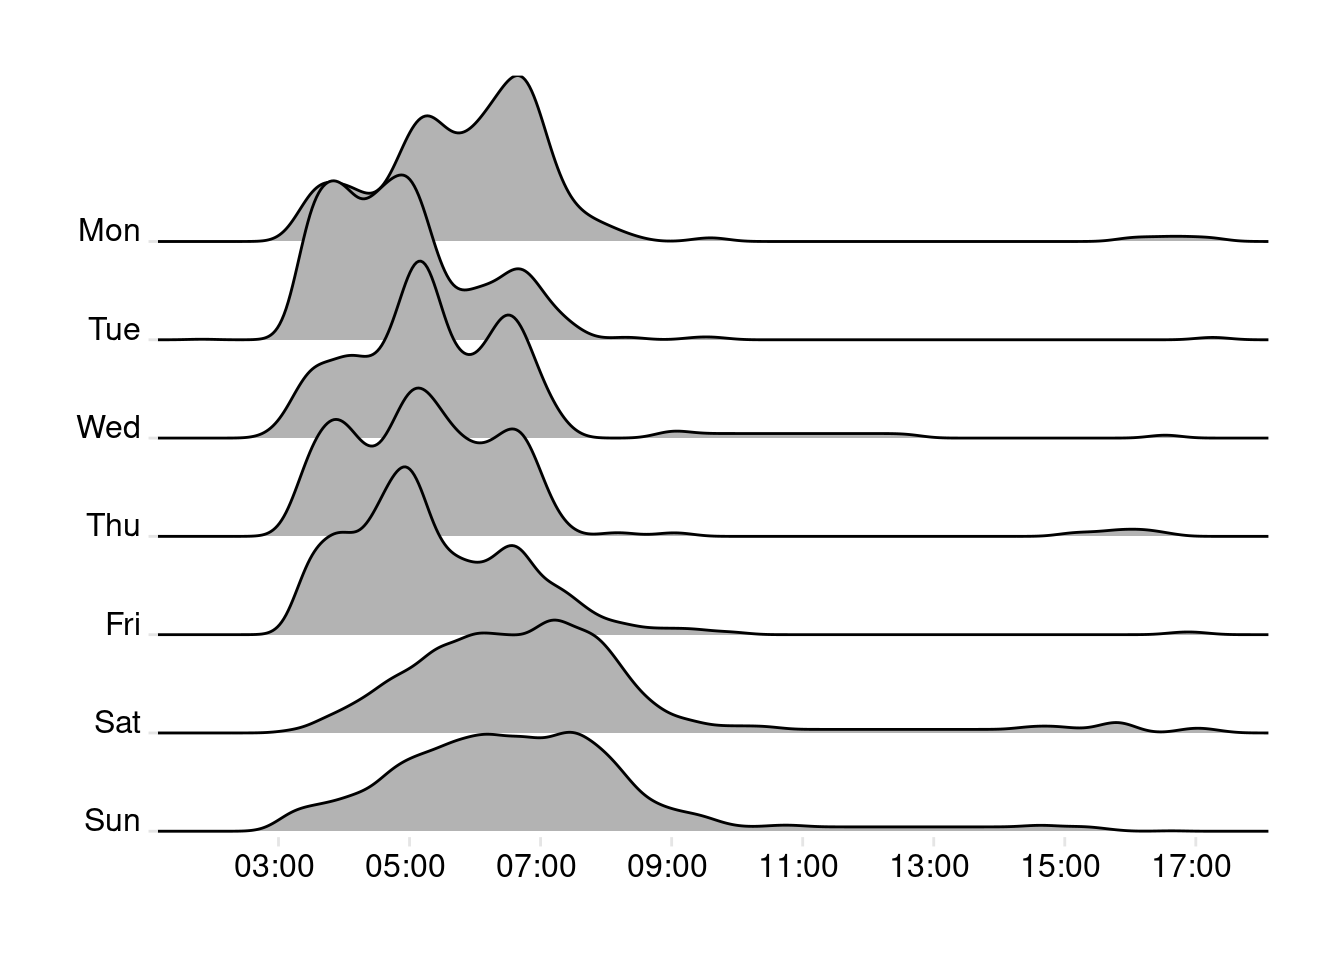 Ridge plot showing distance versus time of day and day of week.